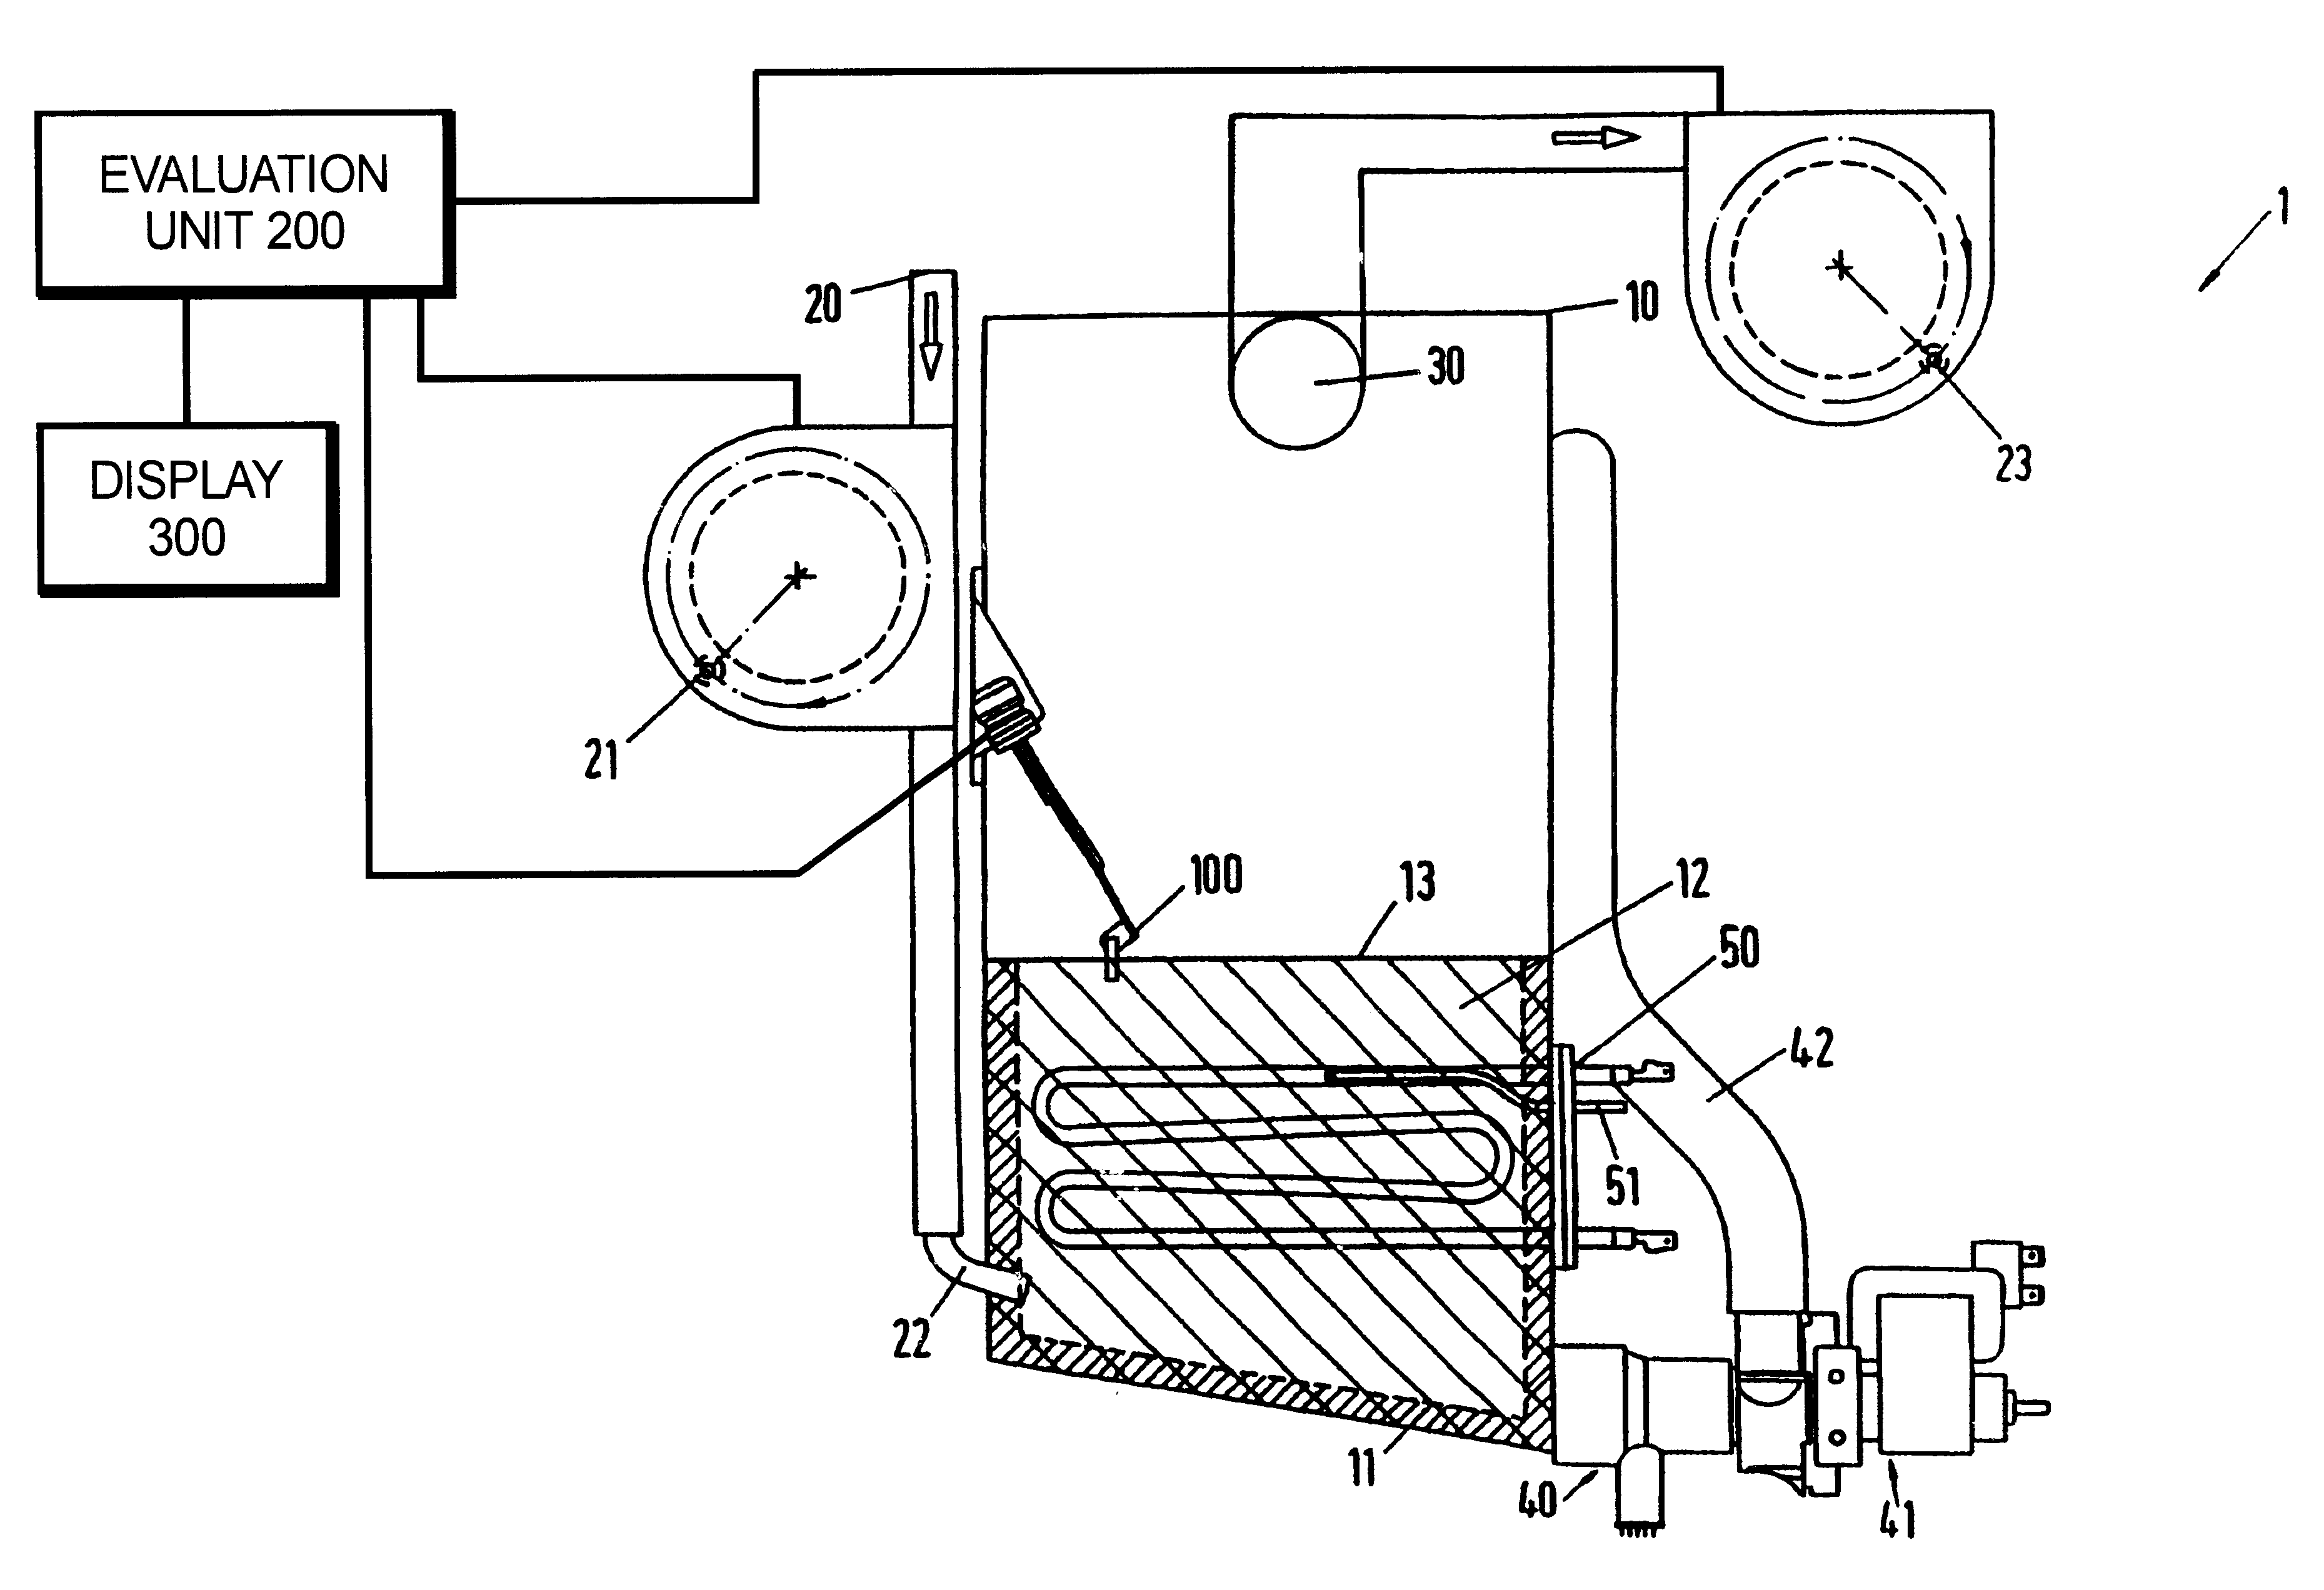 System for electronically monitoring scaling in an apparatus for heating and/or evaporating a liquid